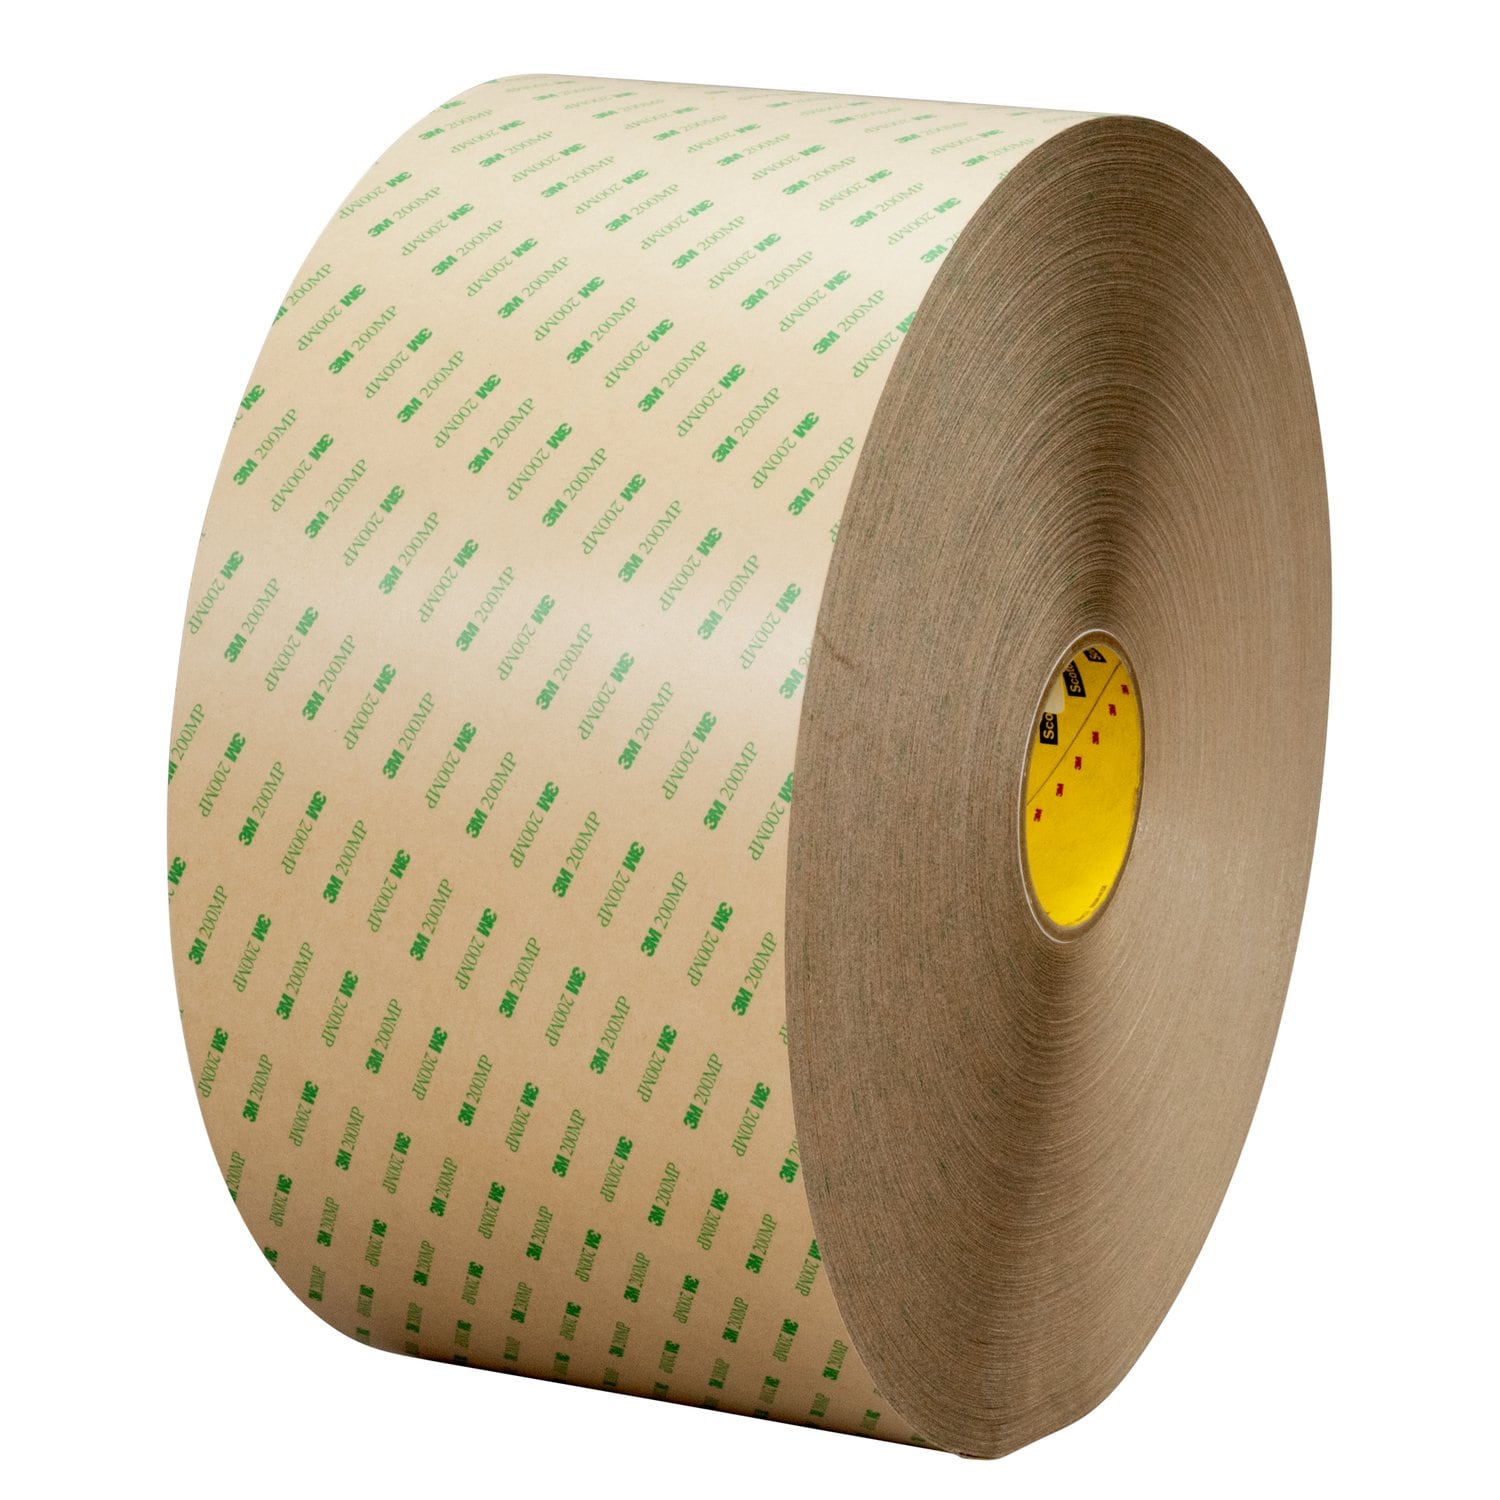 Transfer Tape for Vinyl 24 inch x 100 feet of Masking Paper Tape with  Layflat Adhesive. Premium-Grade Application Tape for Vinyl Graphics and  Sign